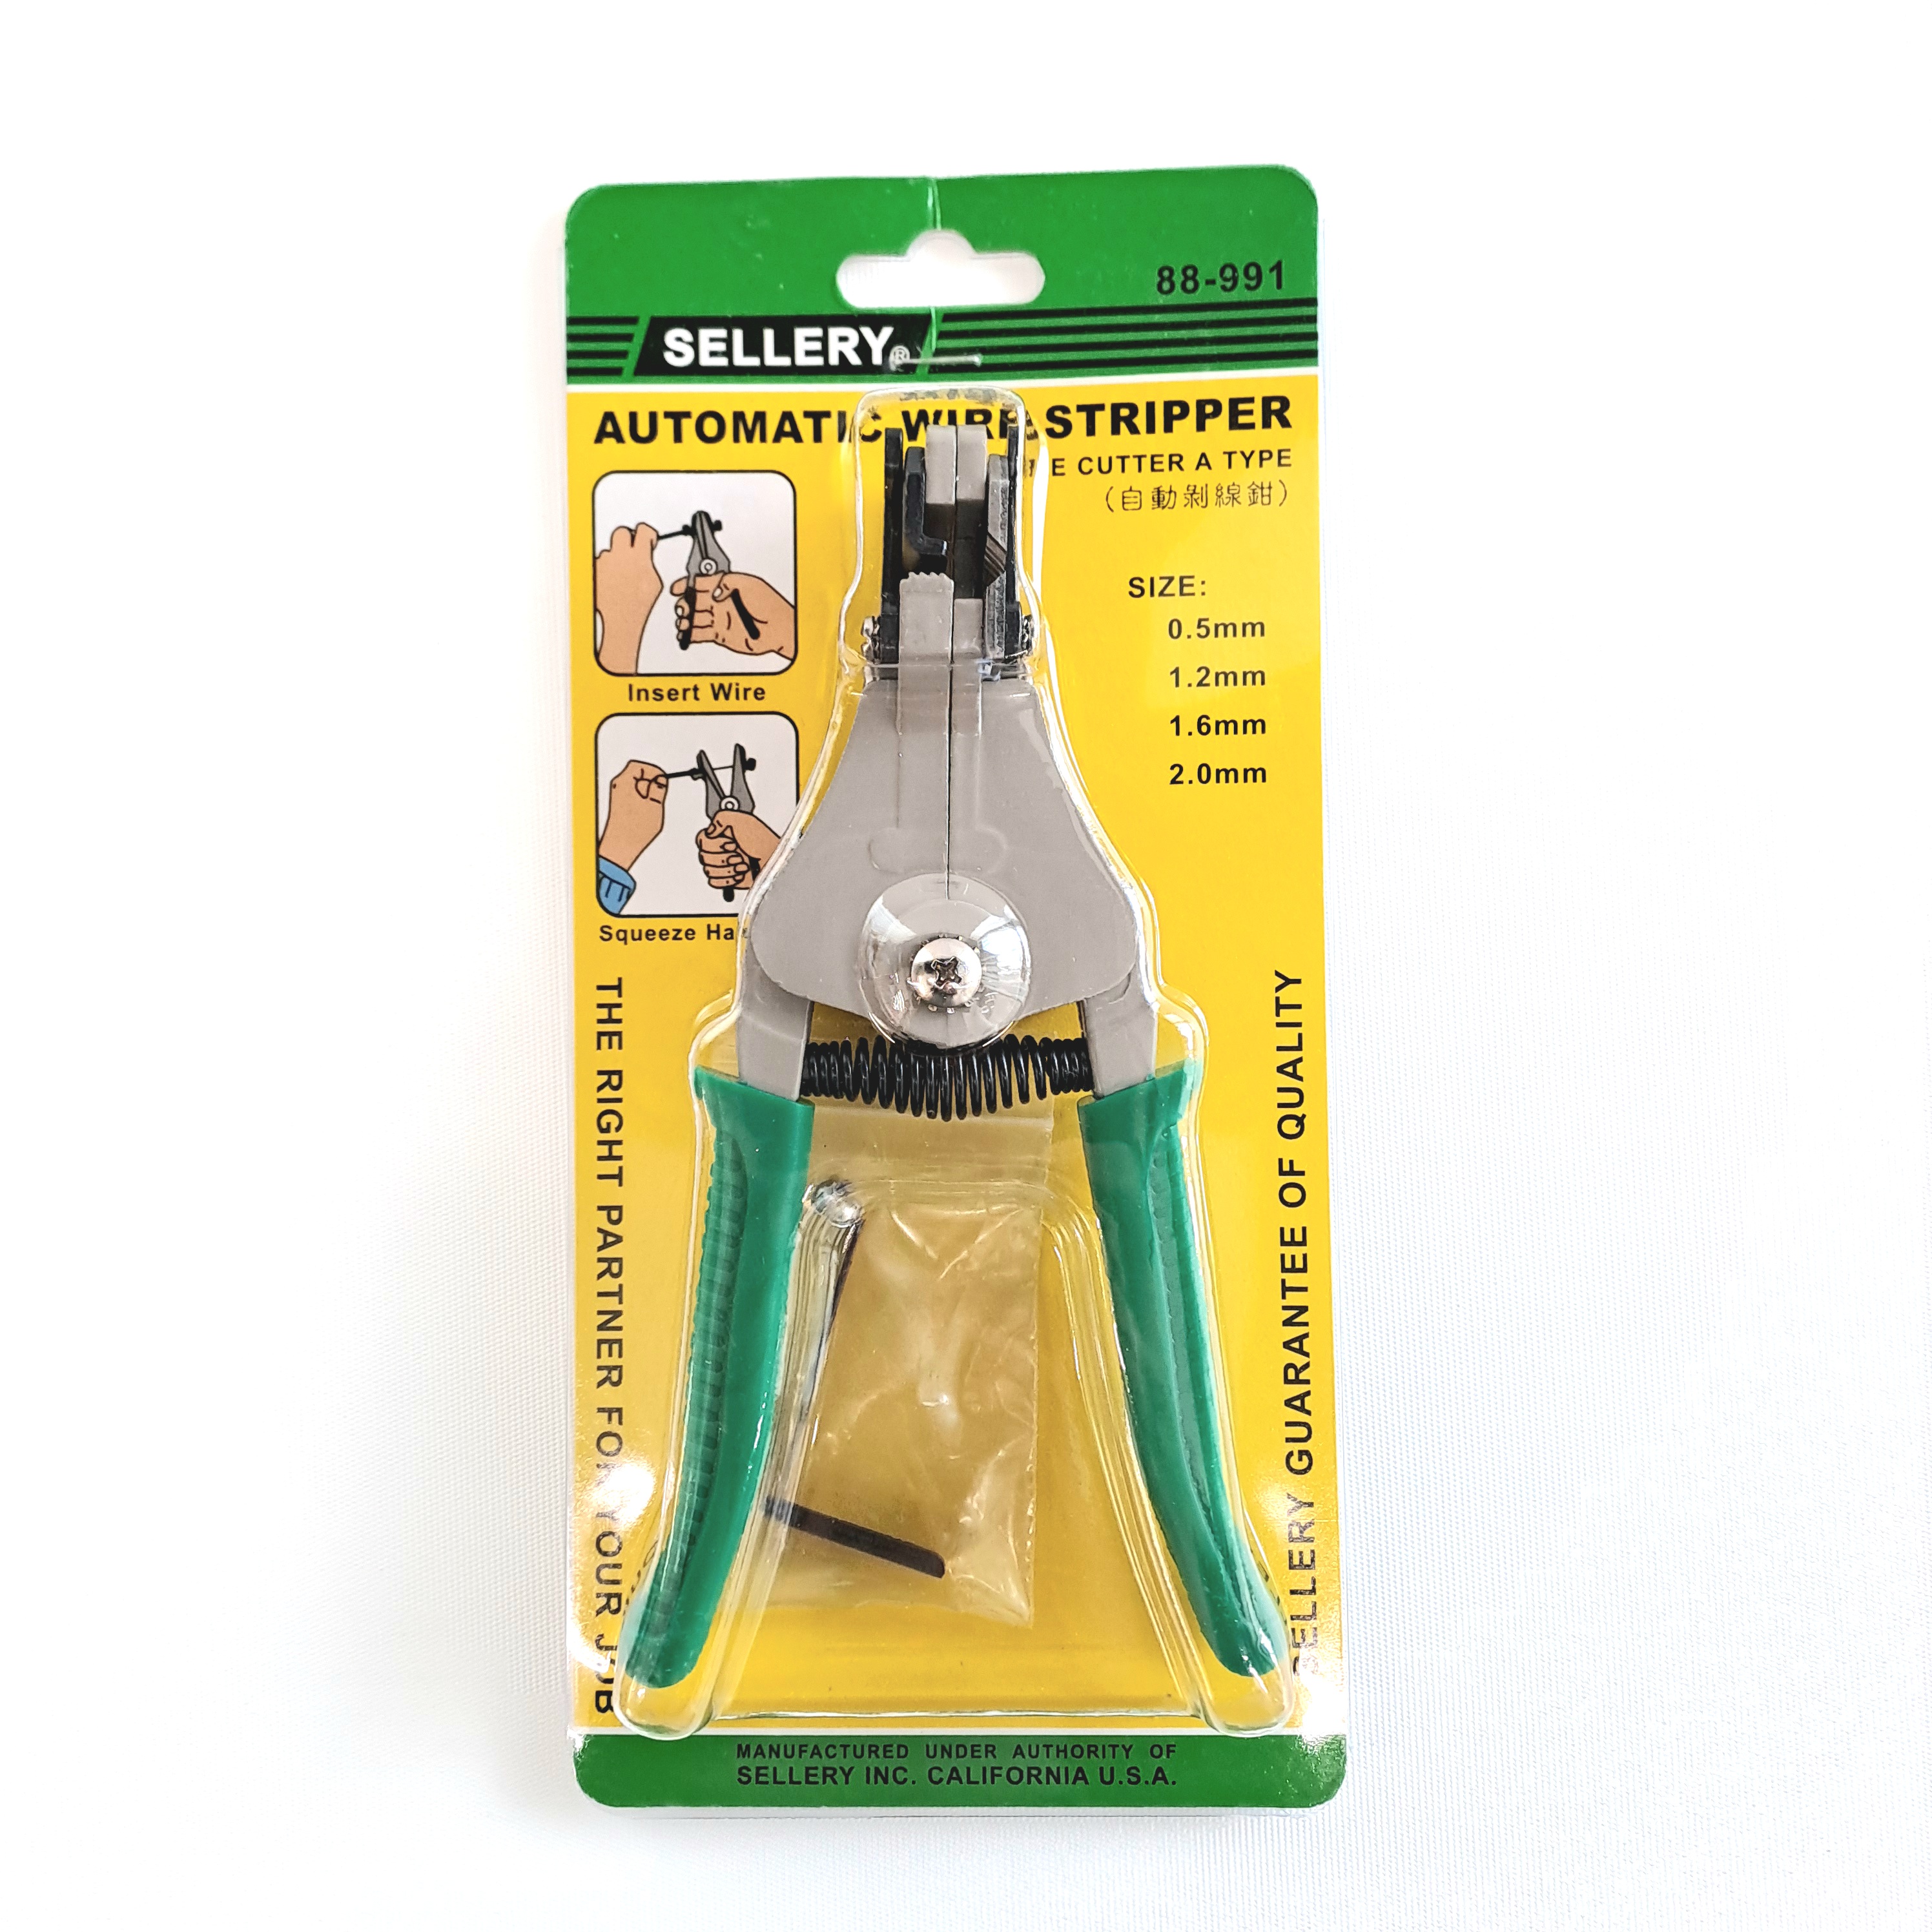 Sellery 88-991 Automatic Wire Stripper (0.5/1.2/1.6/ 2mm) A Type